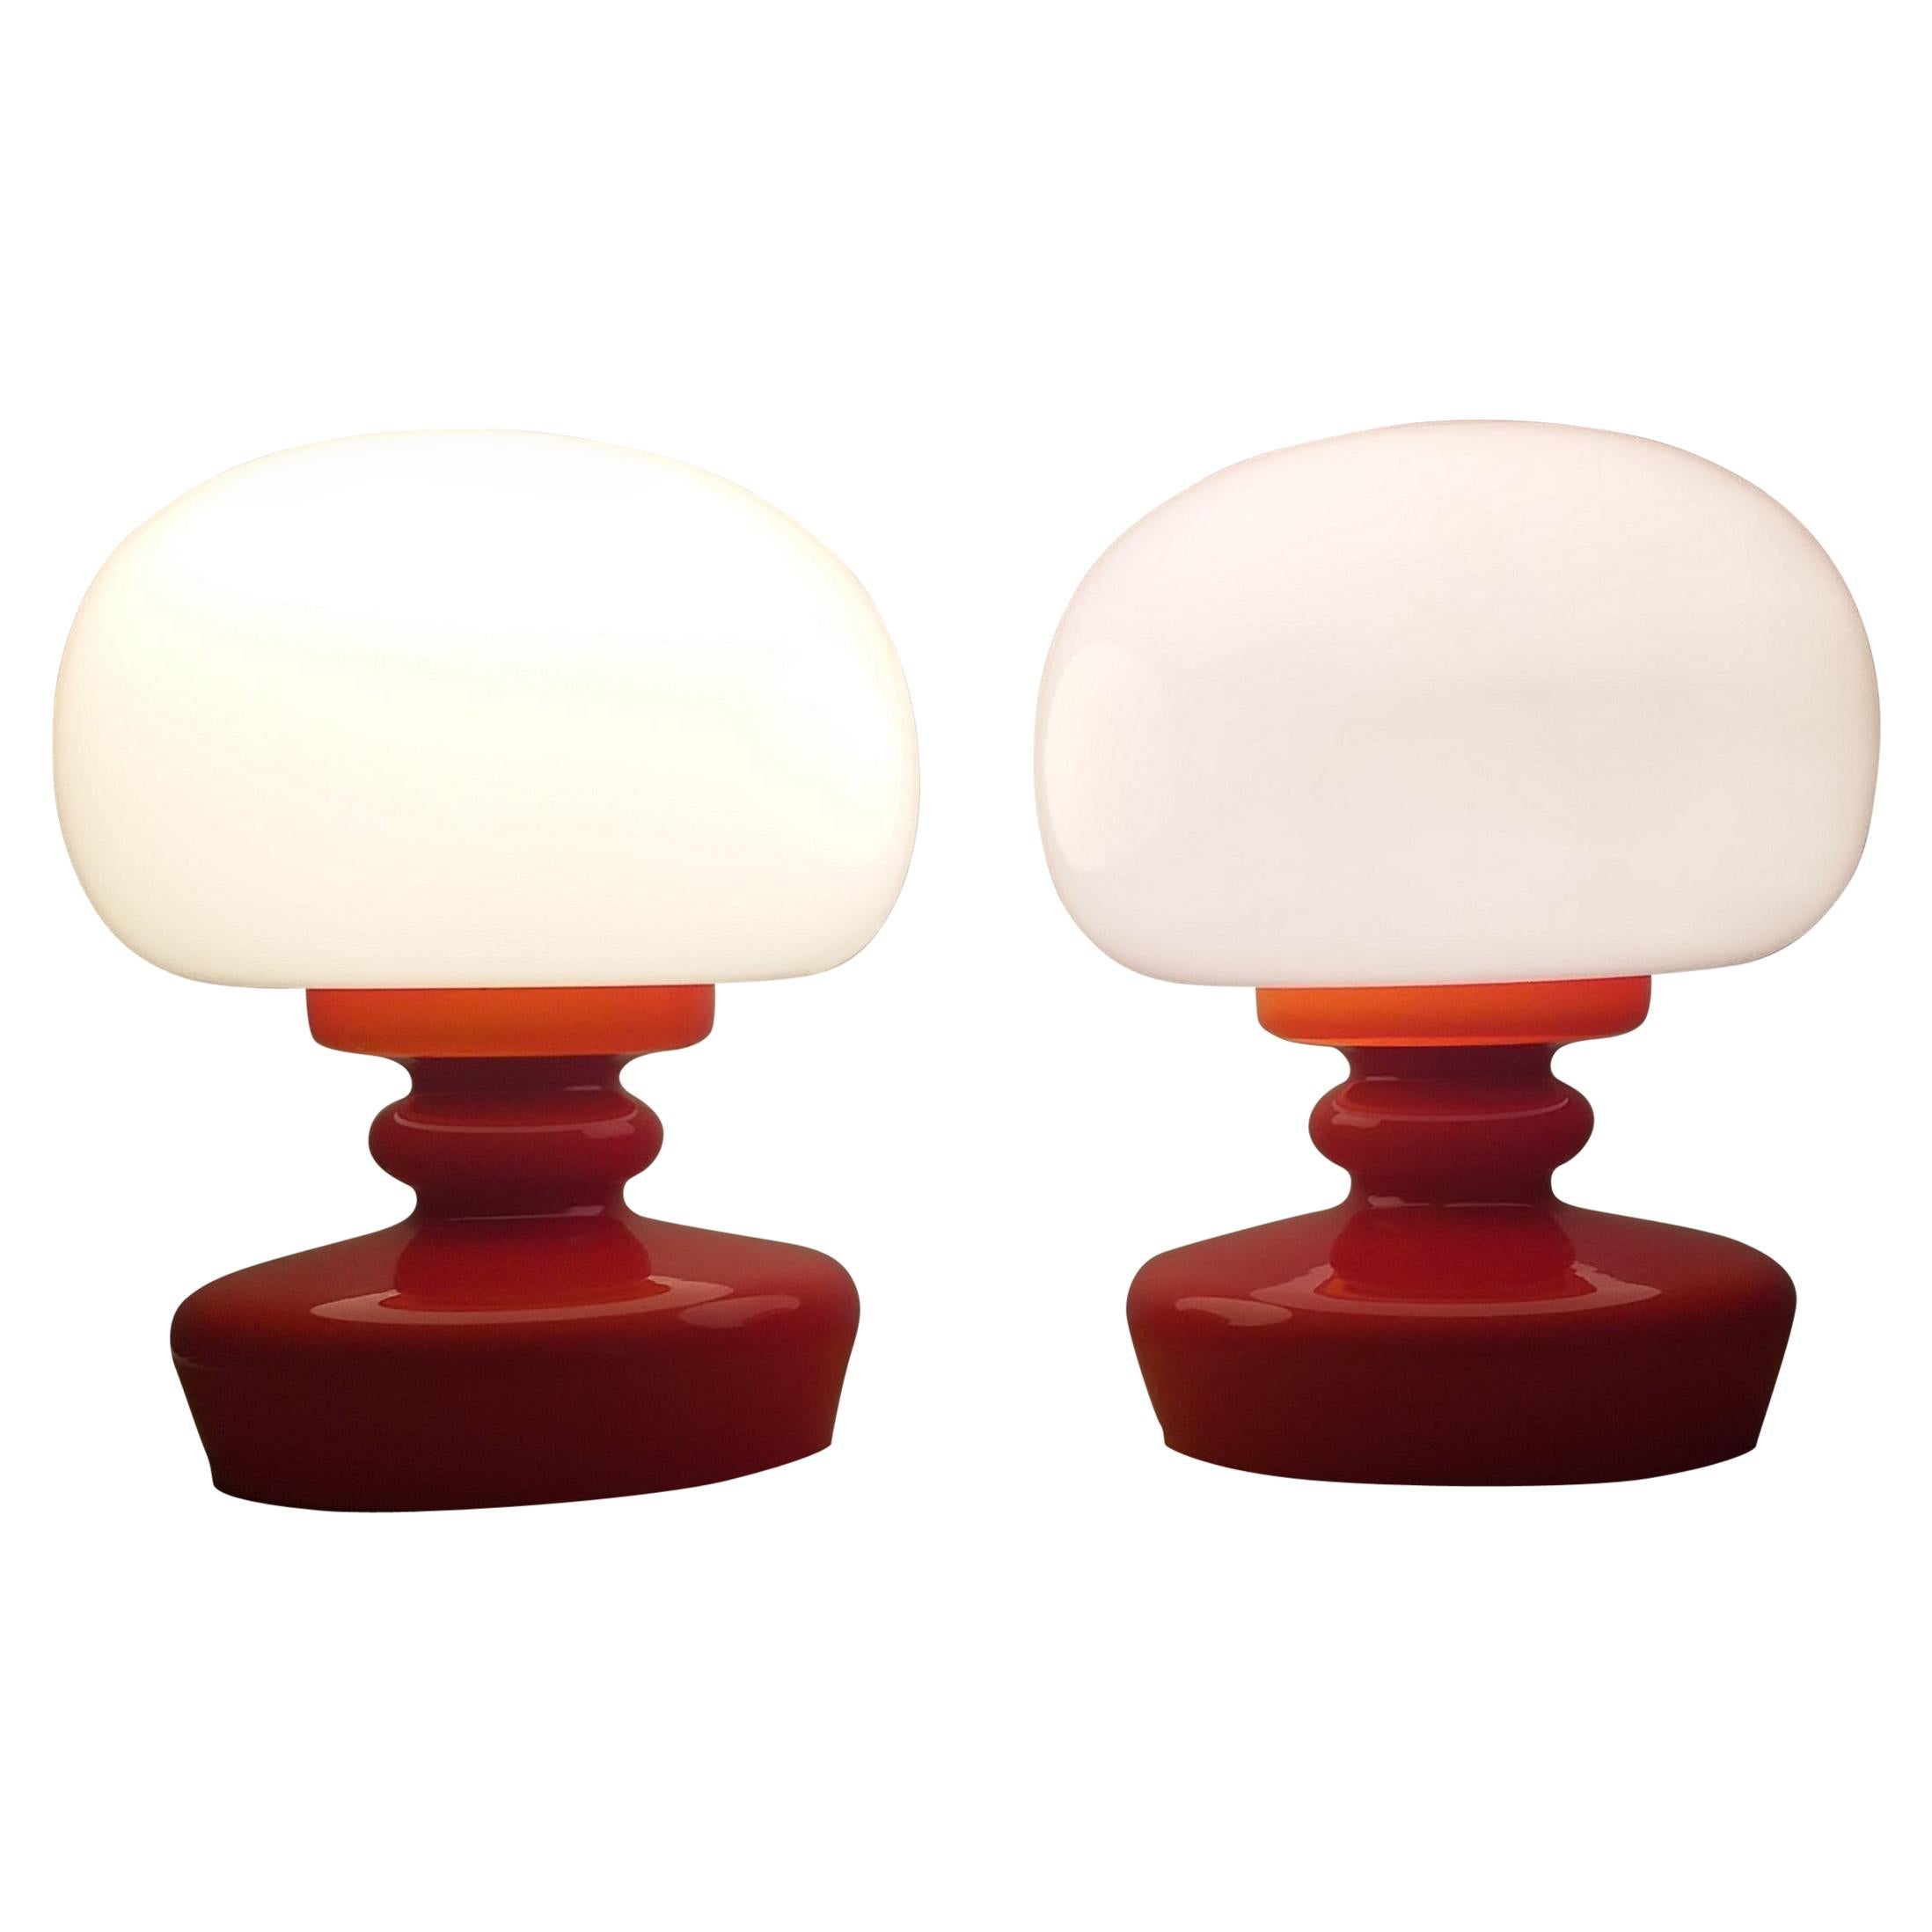 Pair of Midcentury Table Lamps, 1970s